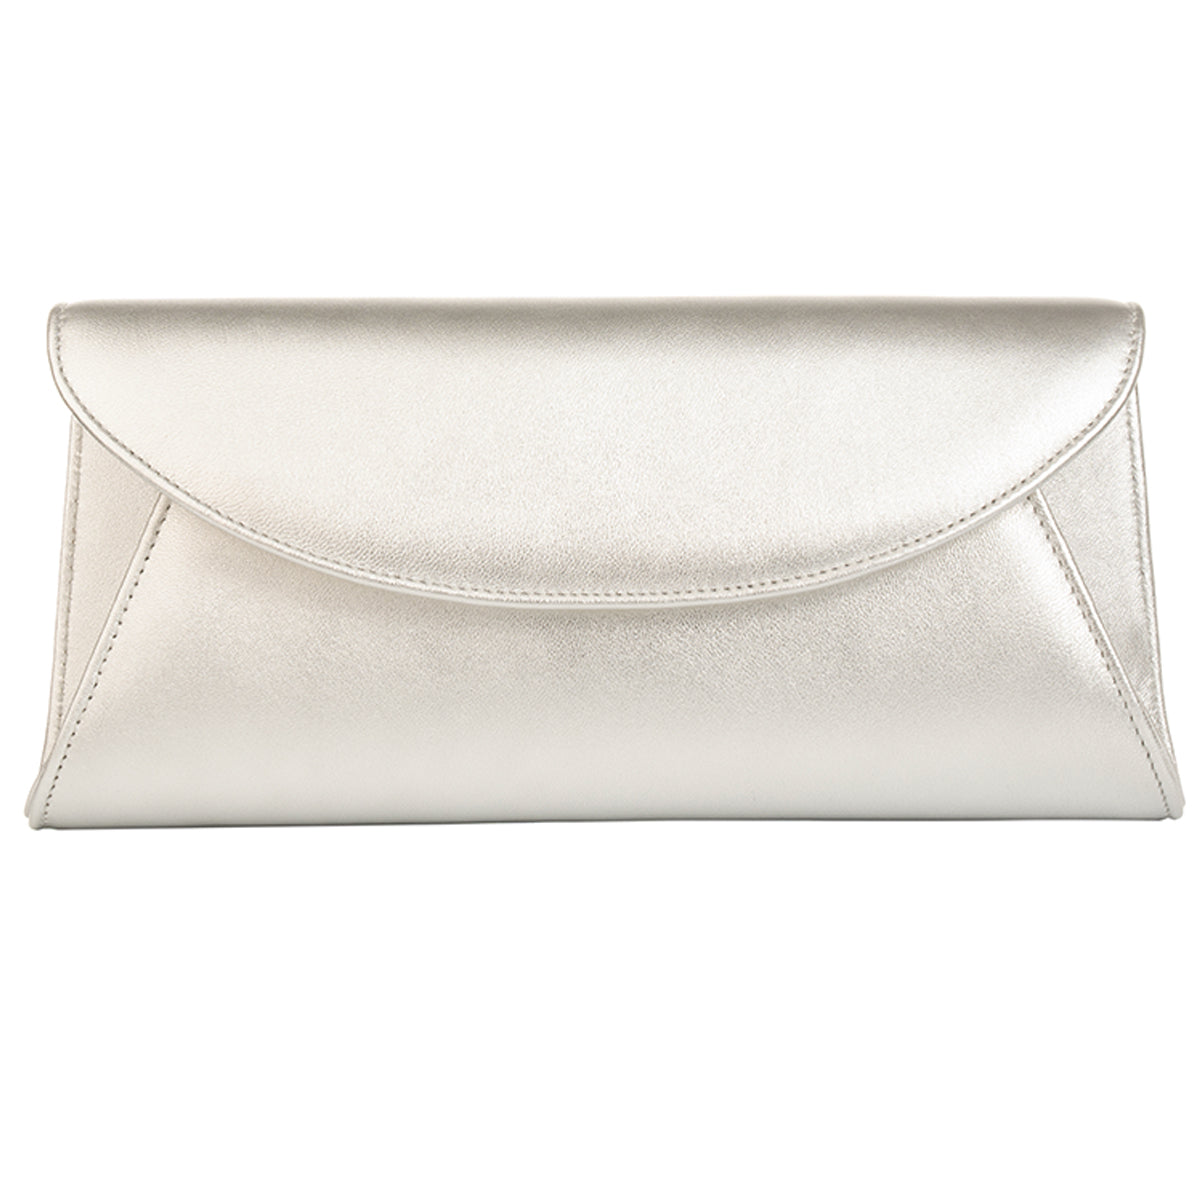 Silver Leather Clutch With A Silver Chain – Sargasso and Grey